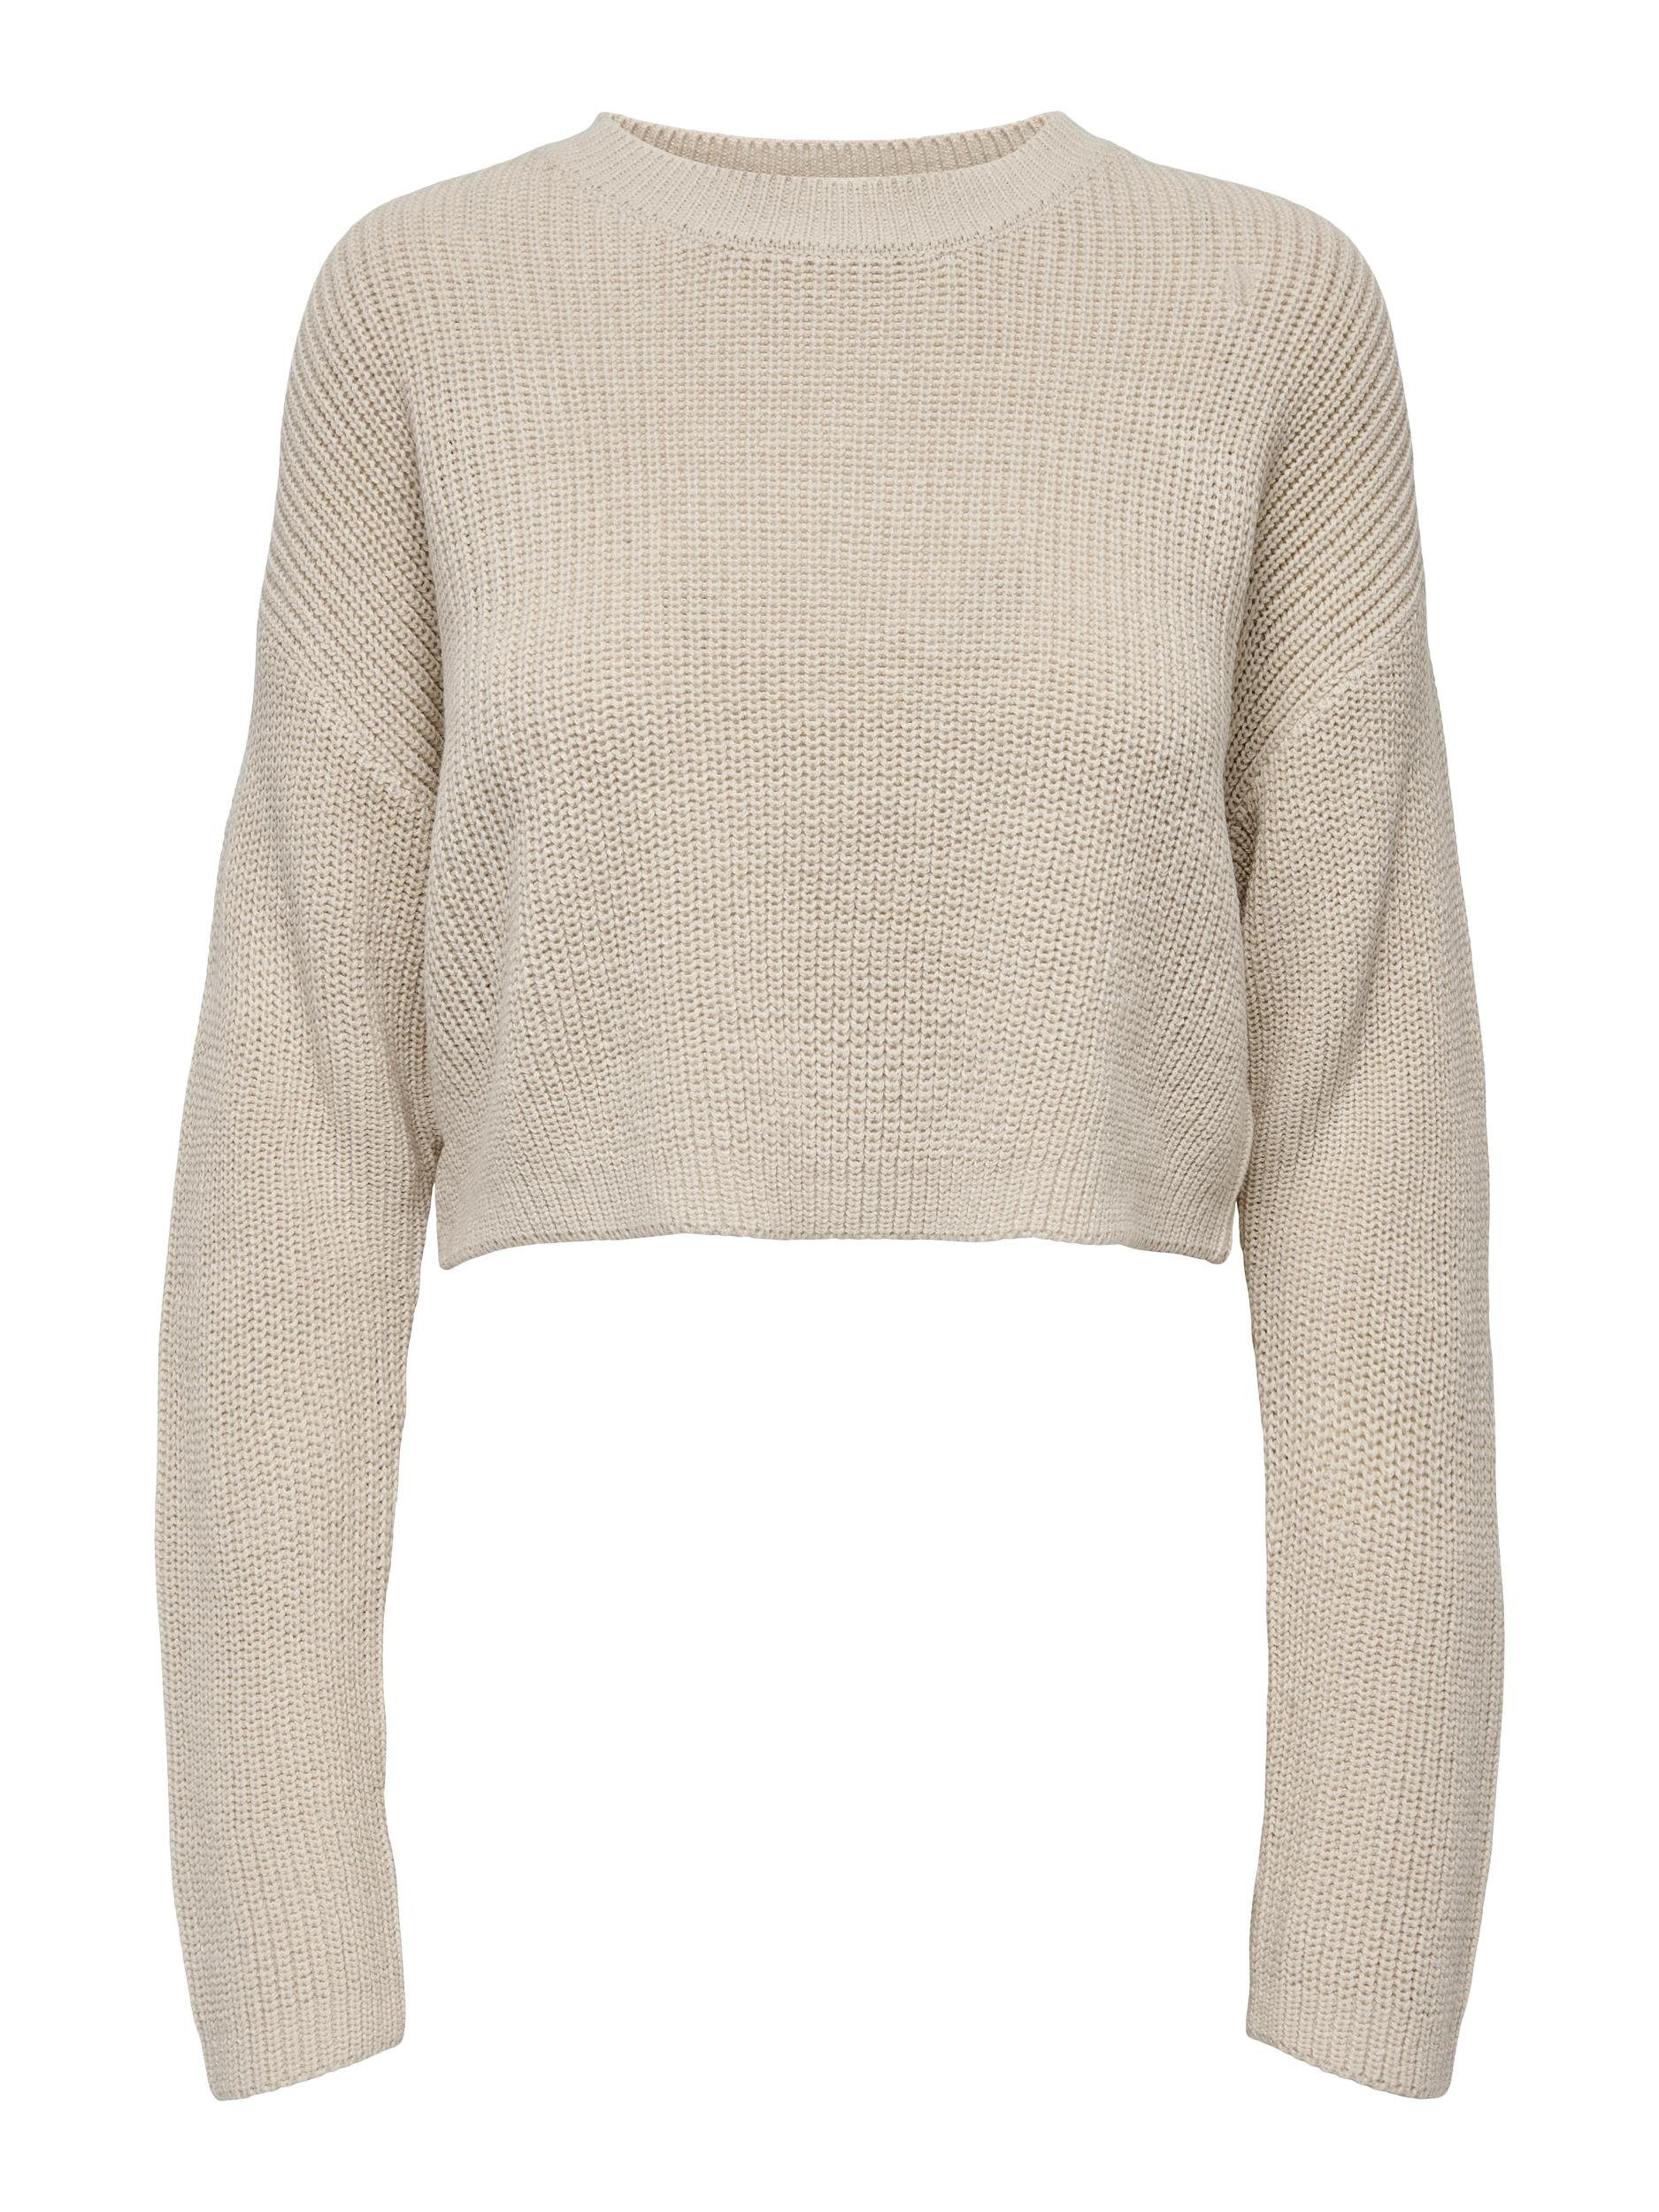 PULLOVER Strickpullover NOOS Pumice KNT ONLY ONLMALAVI L/S CROPPED Stone